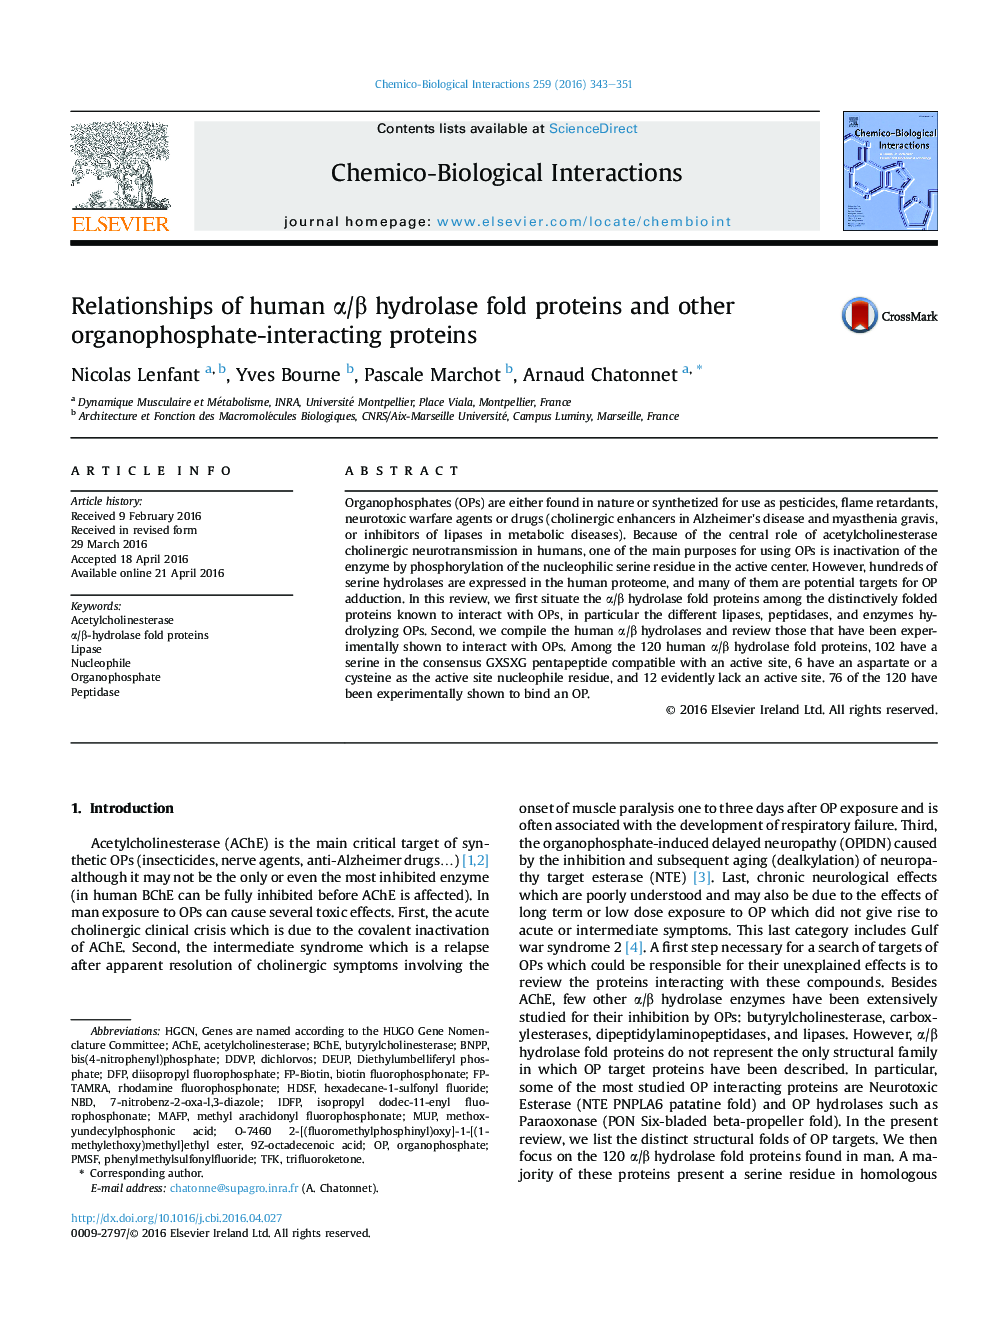 Relationships of human Î±/Î² hydrolase fold proteins and other organophosphate-interacting proteins